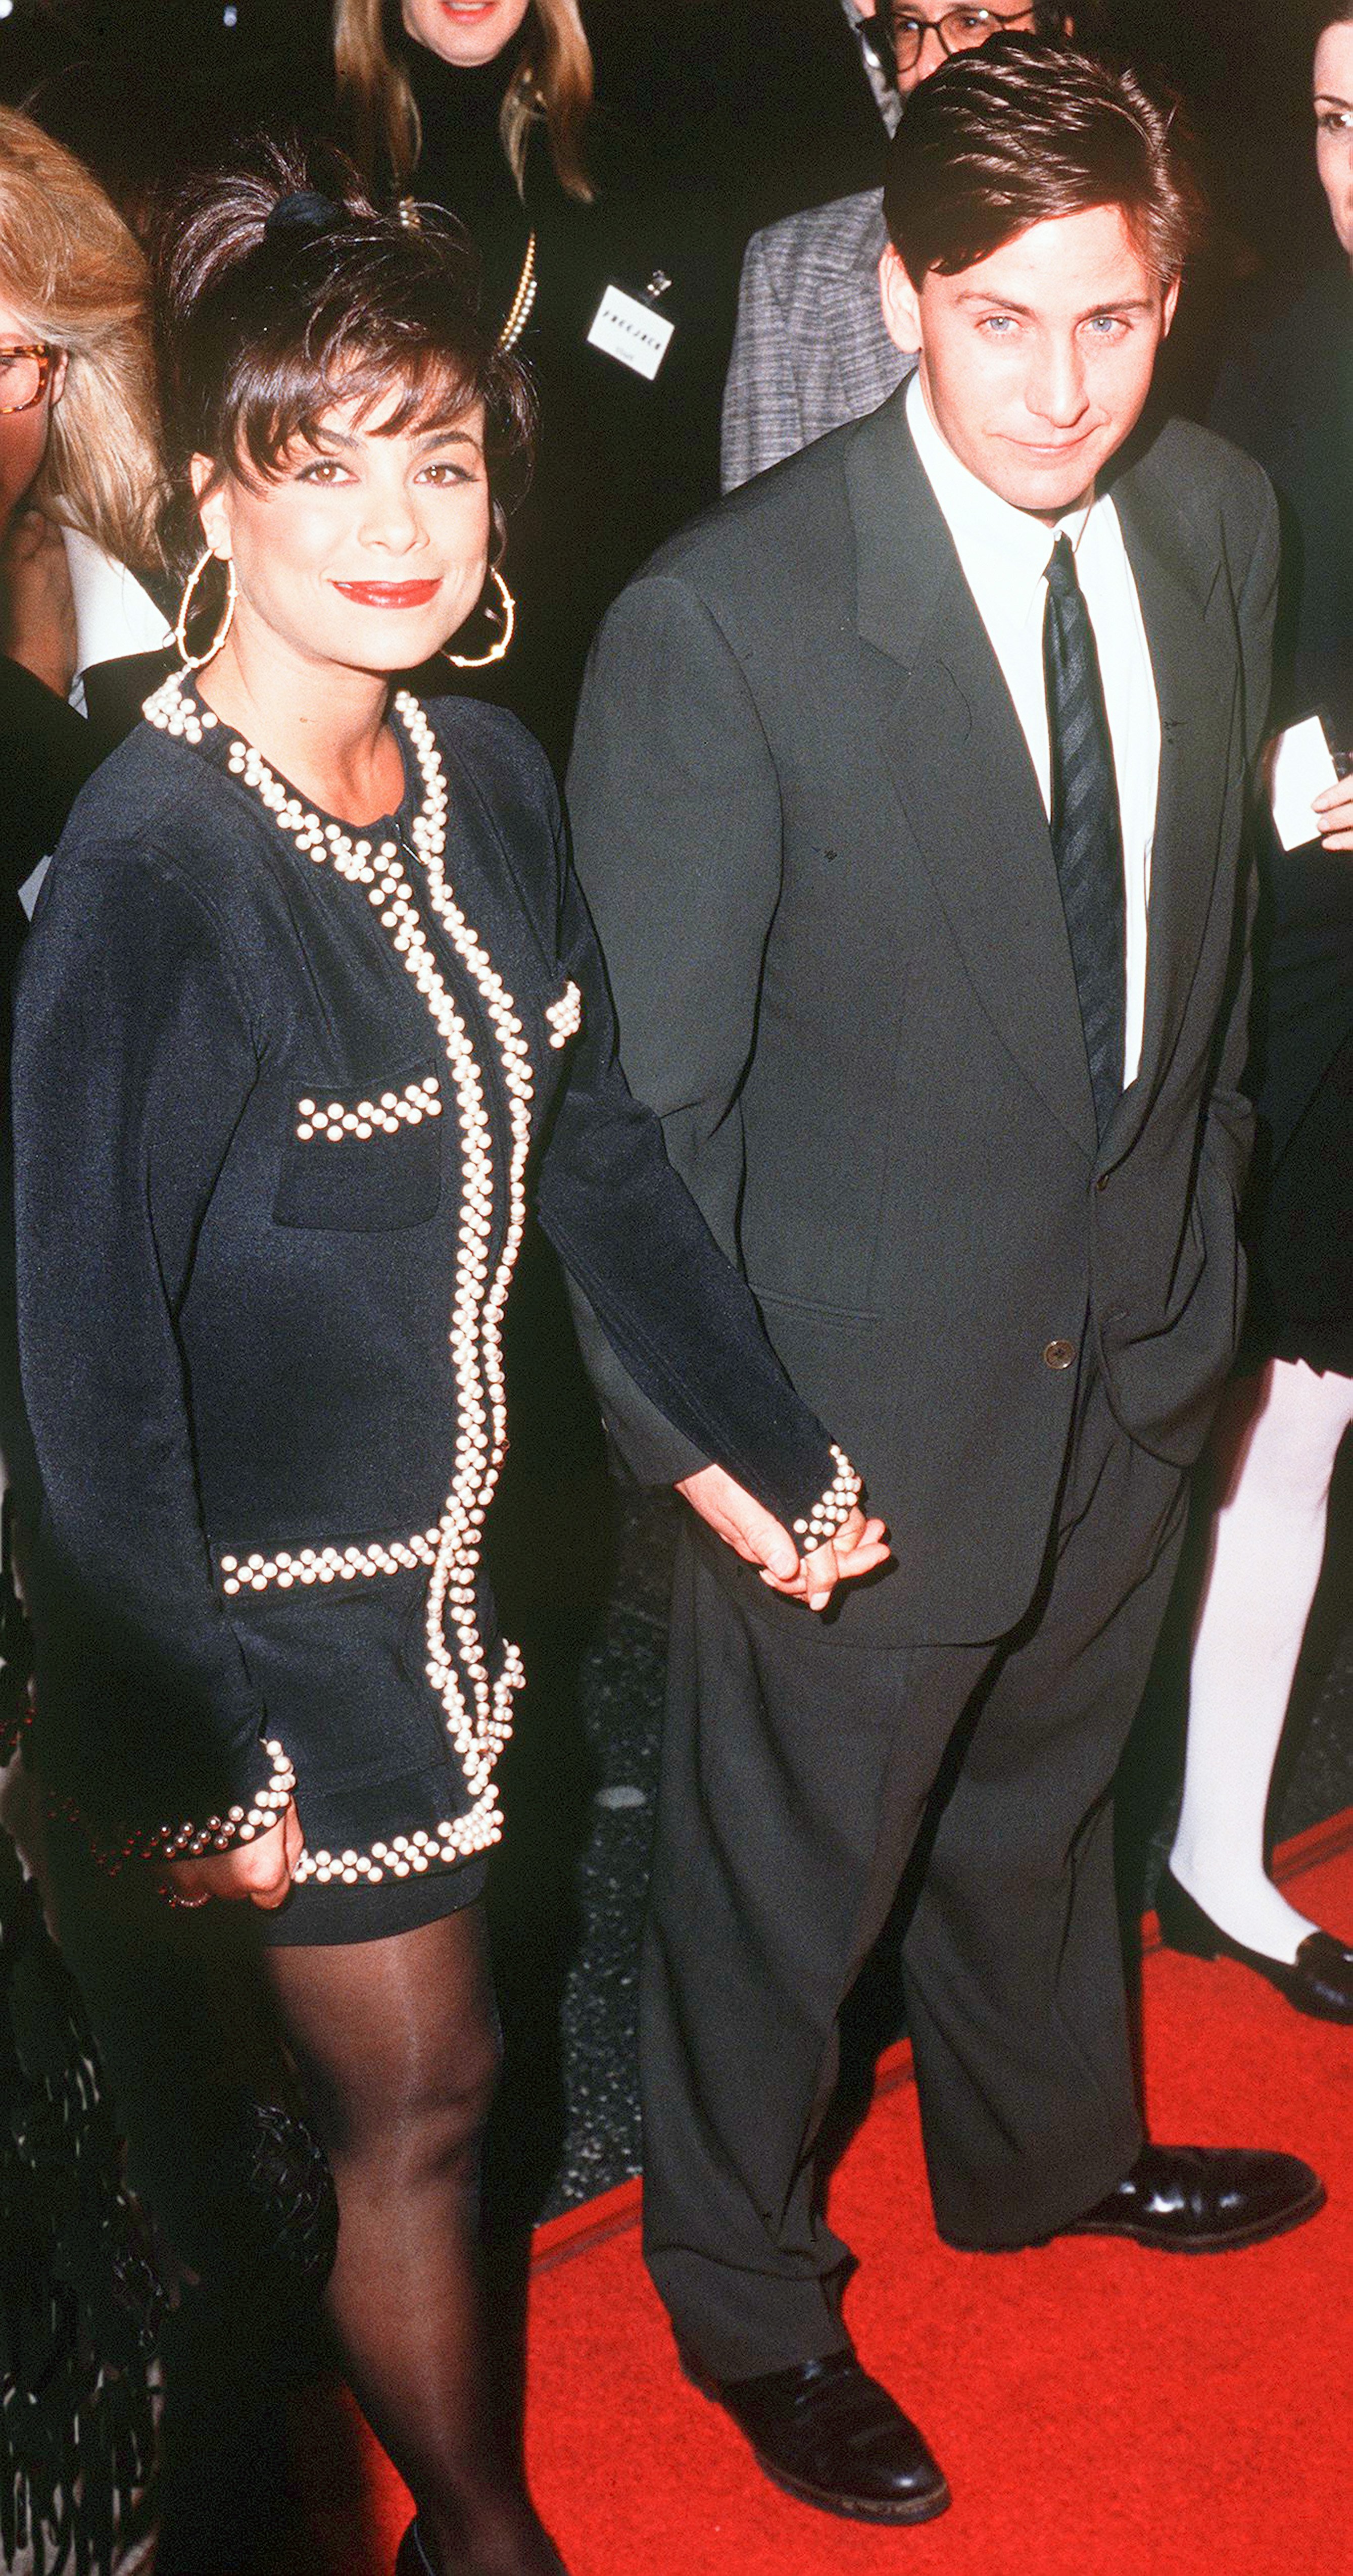 Actor Emelio Estevez with Paula Abdul in Los Angeles for the premiere of his film 'Freejack', 16th January 1992. | Source: Getty Images